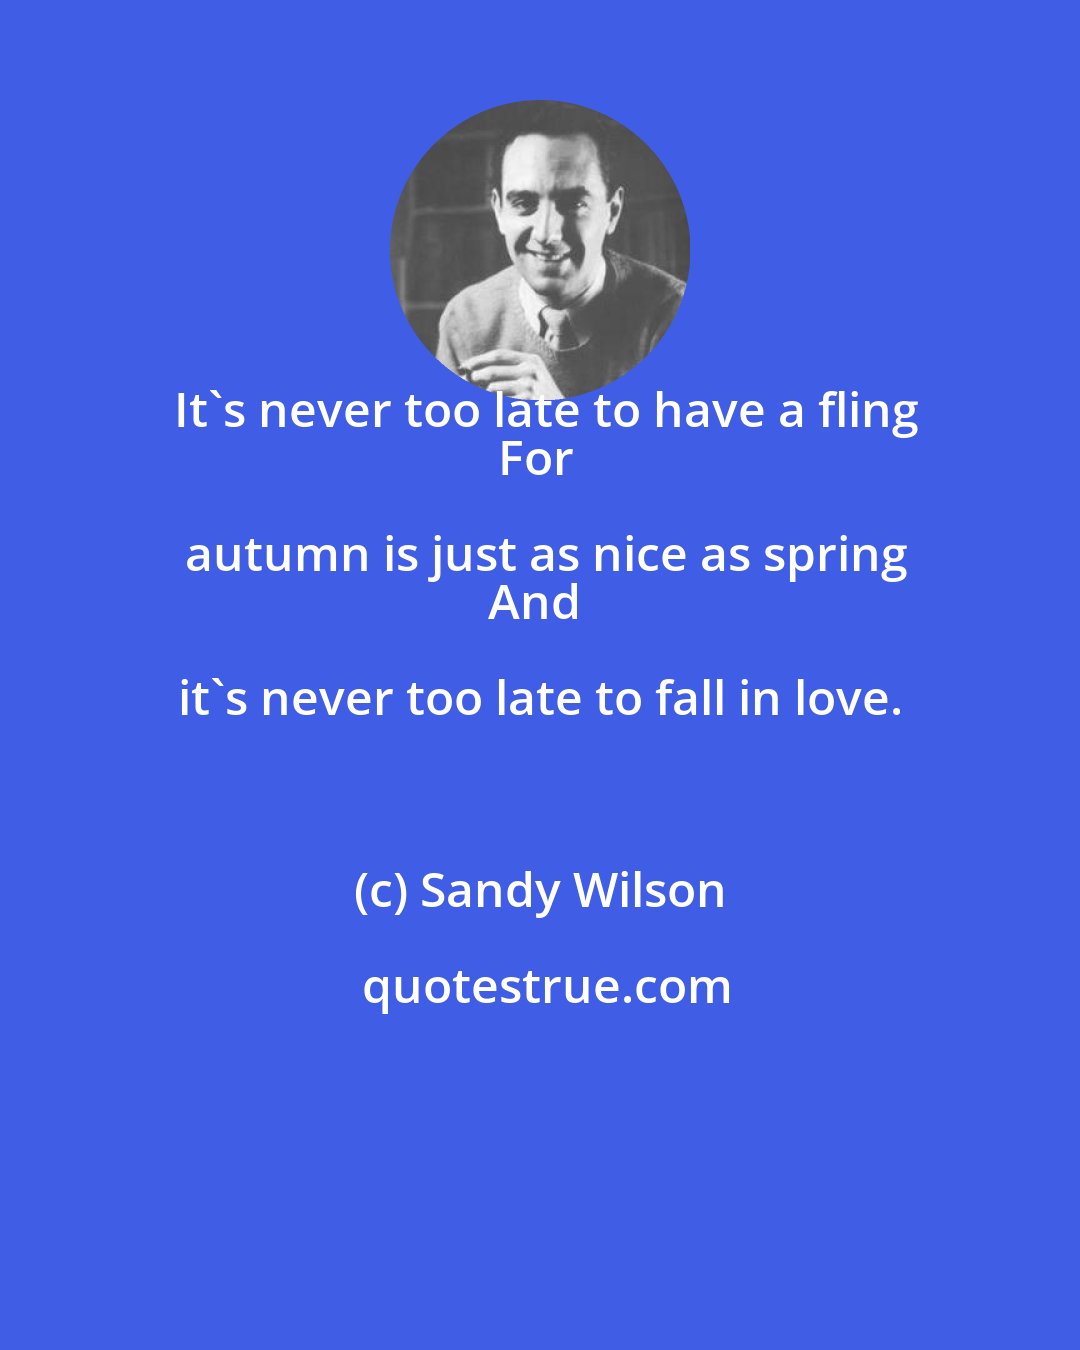 Sandy Wilson: It's never too late to have a fling
For autumn is just as nice as spring
And it's never too late to fall in love.